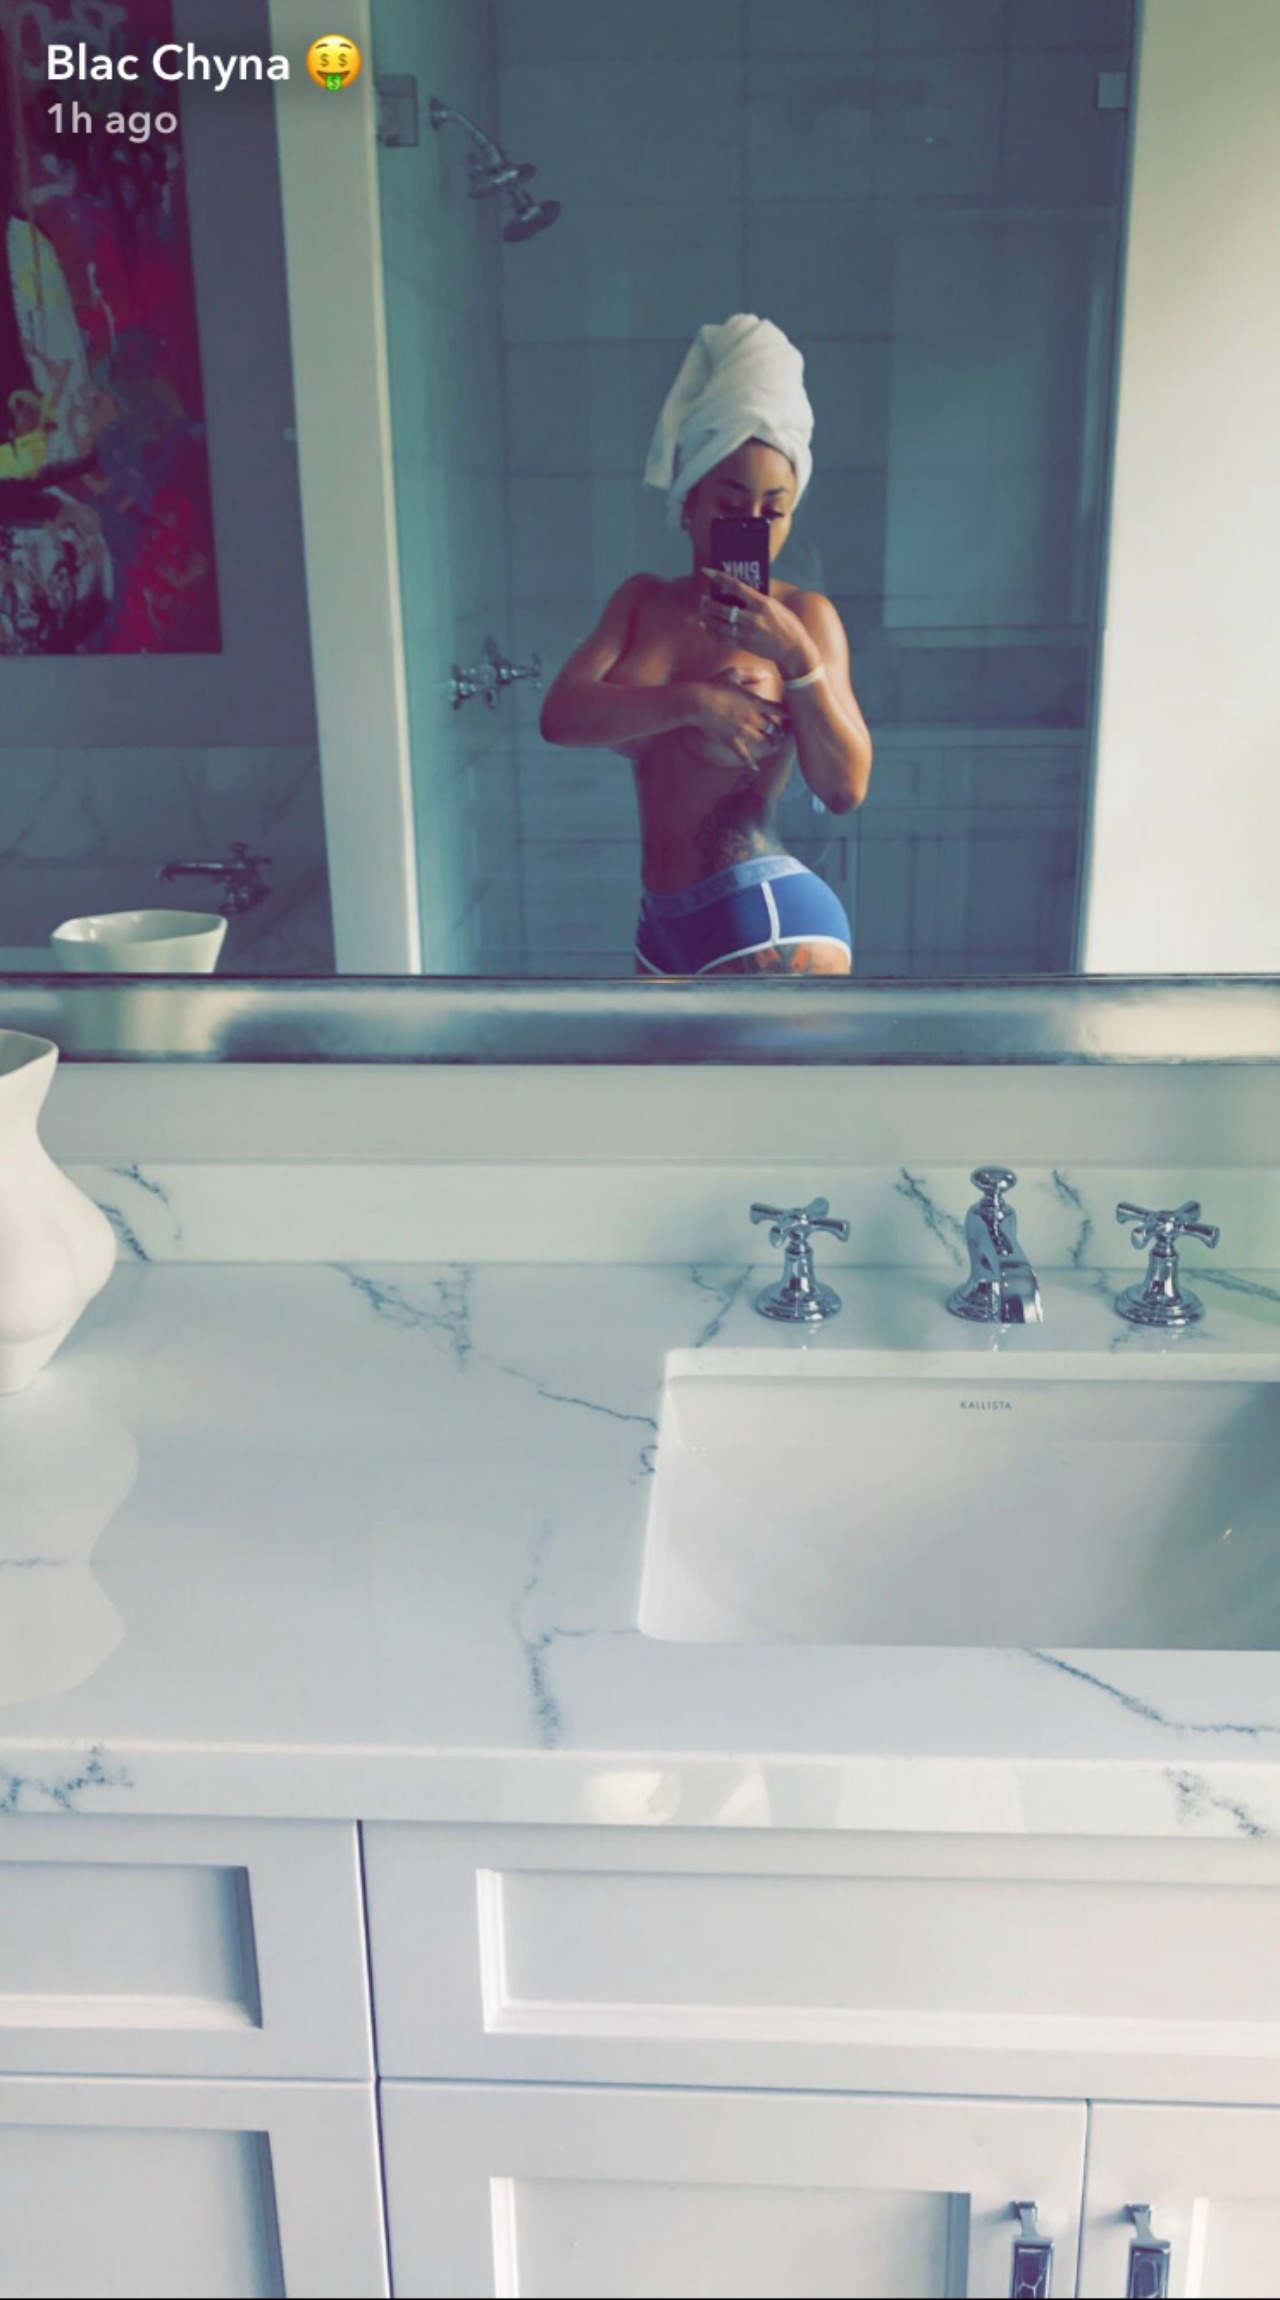 Topless Selfie Blac Chyna posted On Snapchat 1